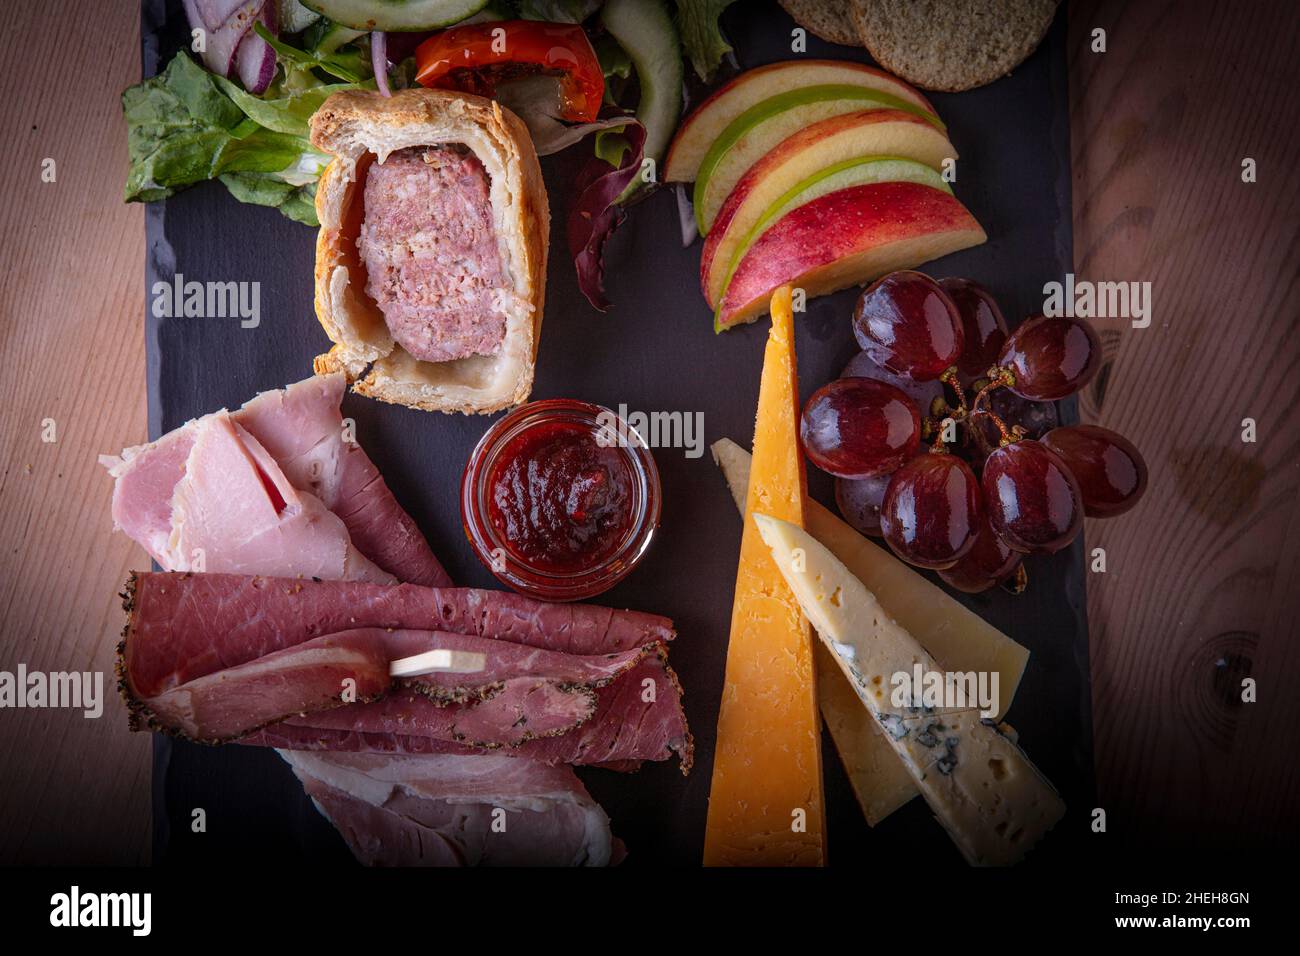 Ploughmans Lunch of meats and fruit. Stock Photo